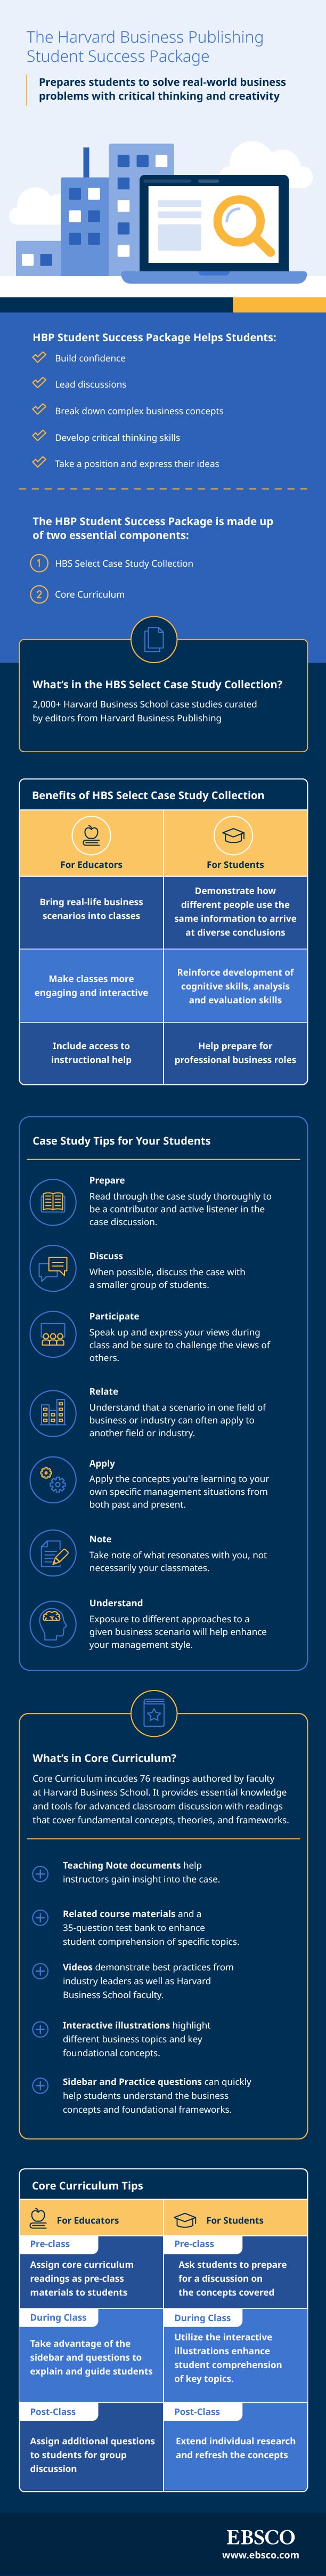 HBP Student Success Package Infographic   